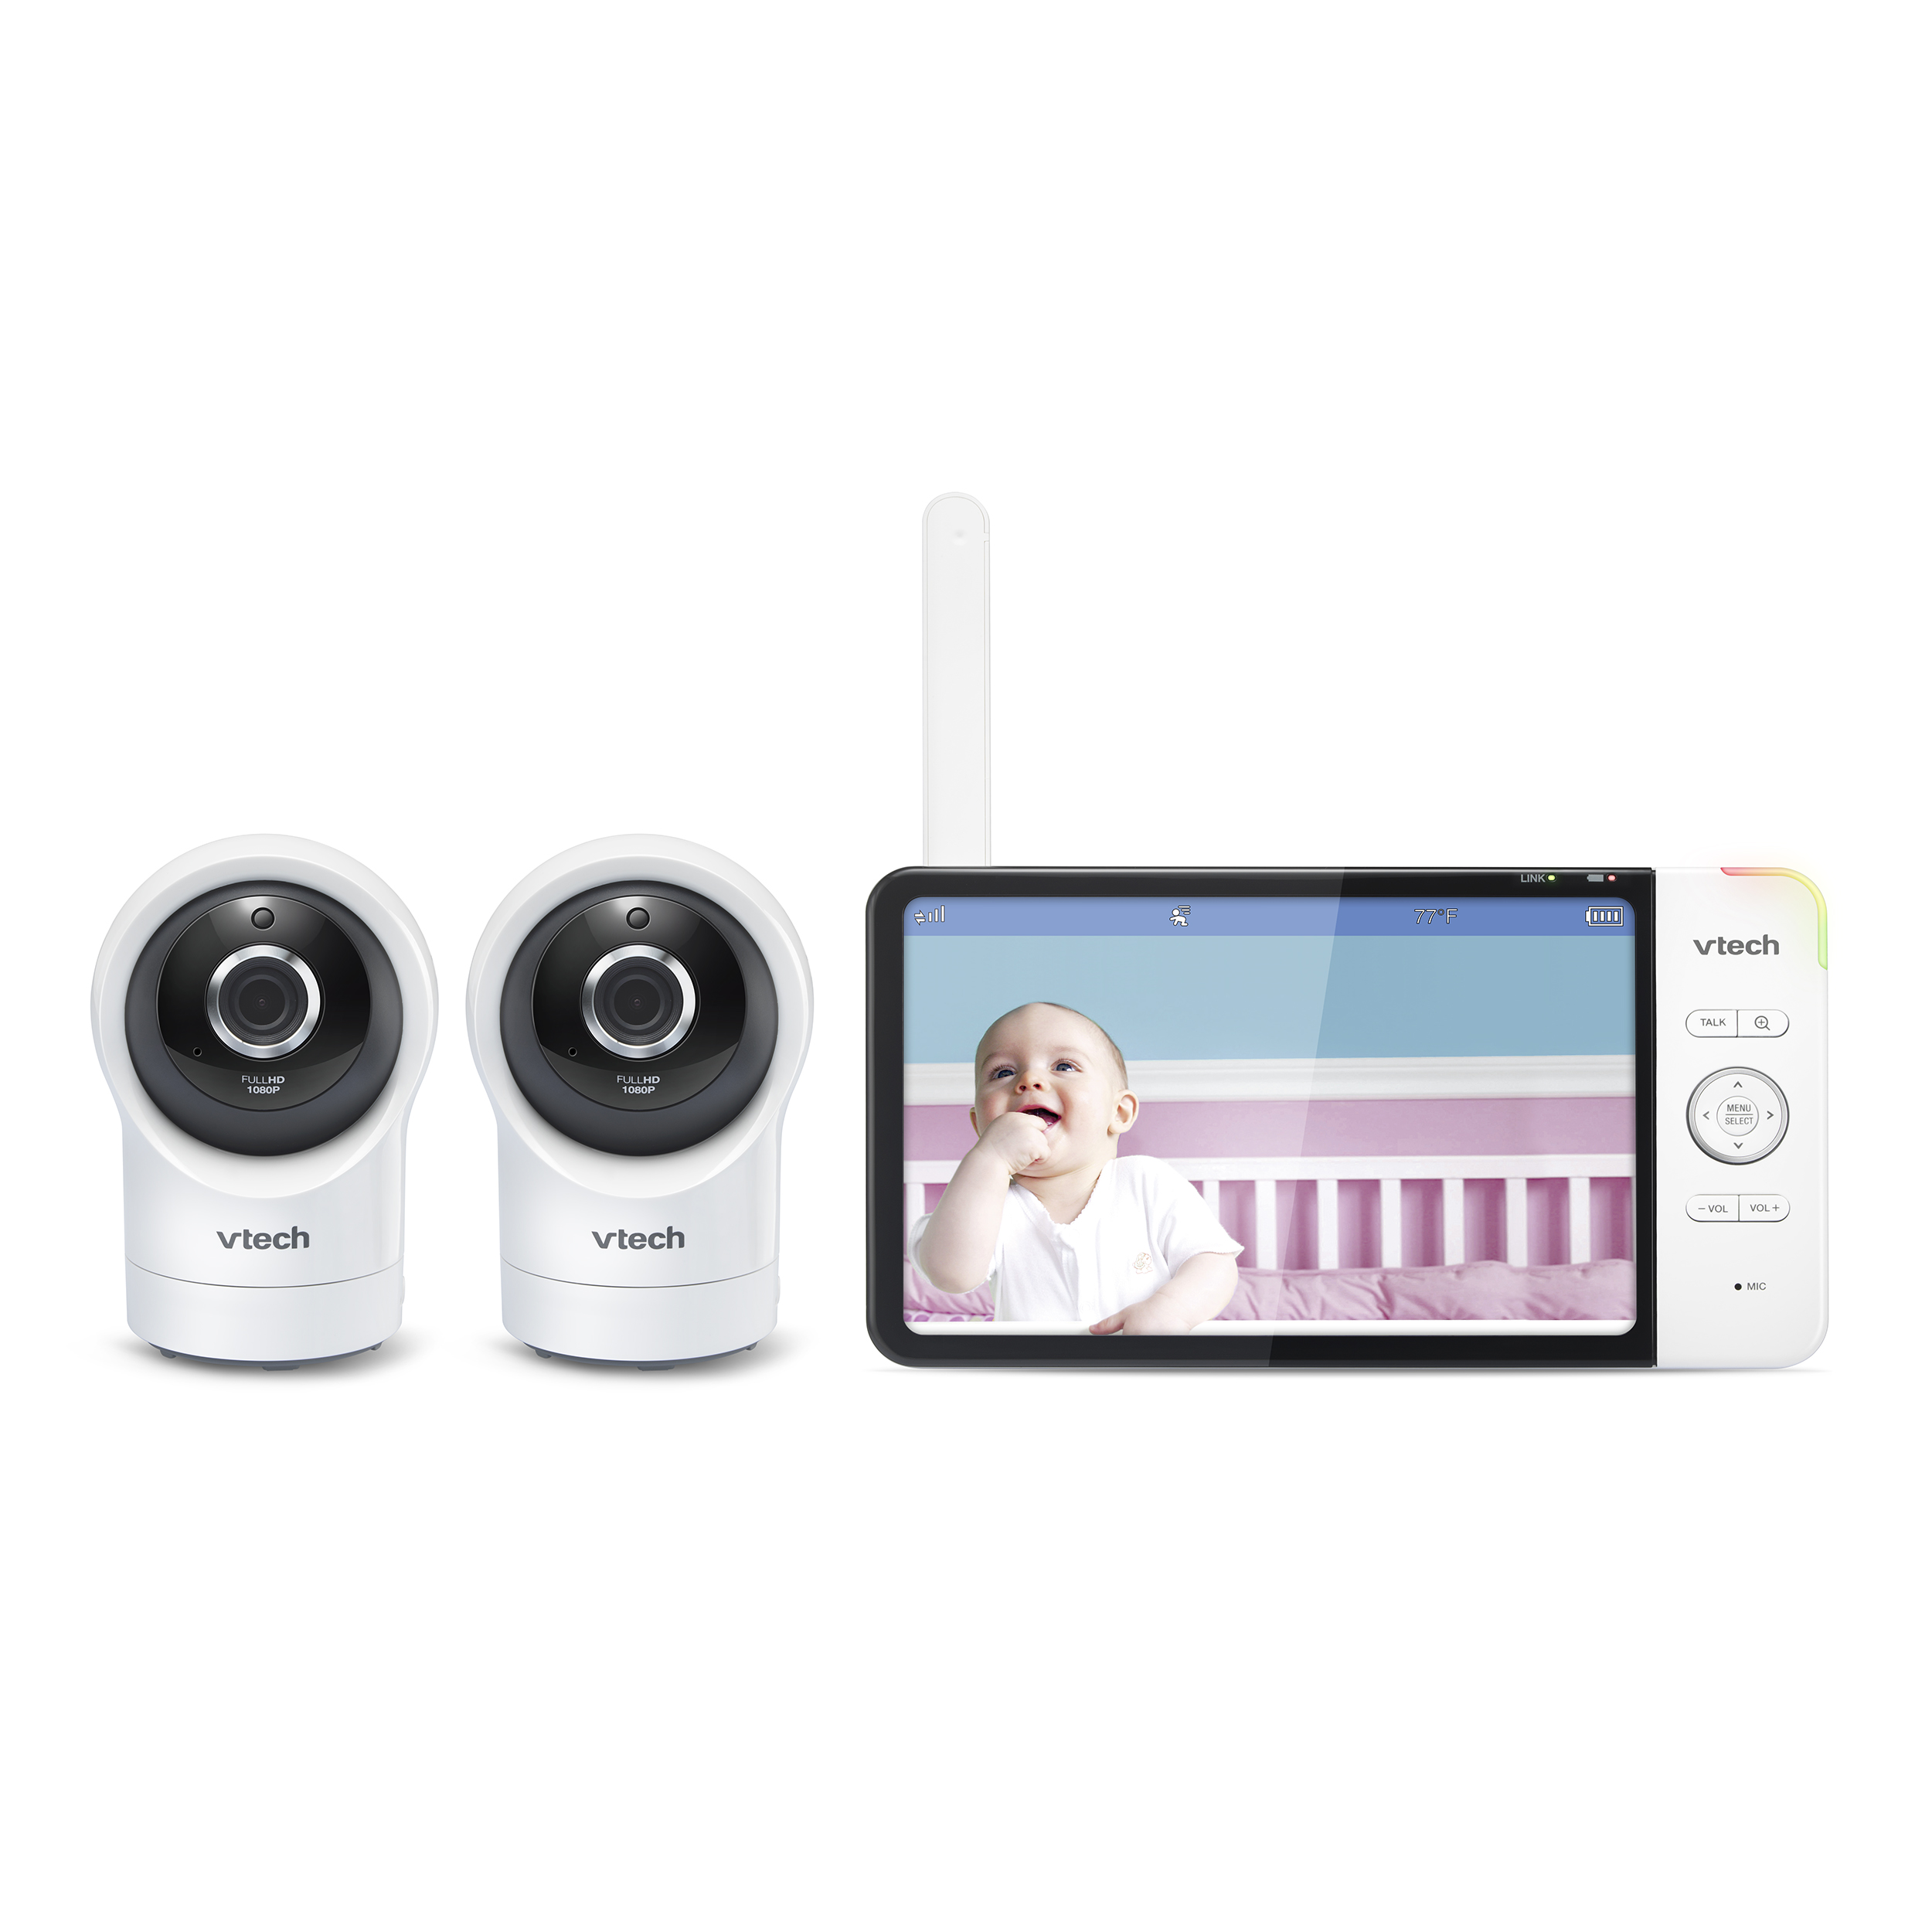 Wi-Fi Remote Access 2 Camera Video Baby Monitor with 7" display and 1080p HD 360 degree Panoramic Viewing Pan & Tilt Camera - view 1